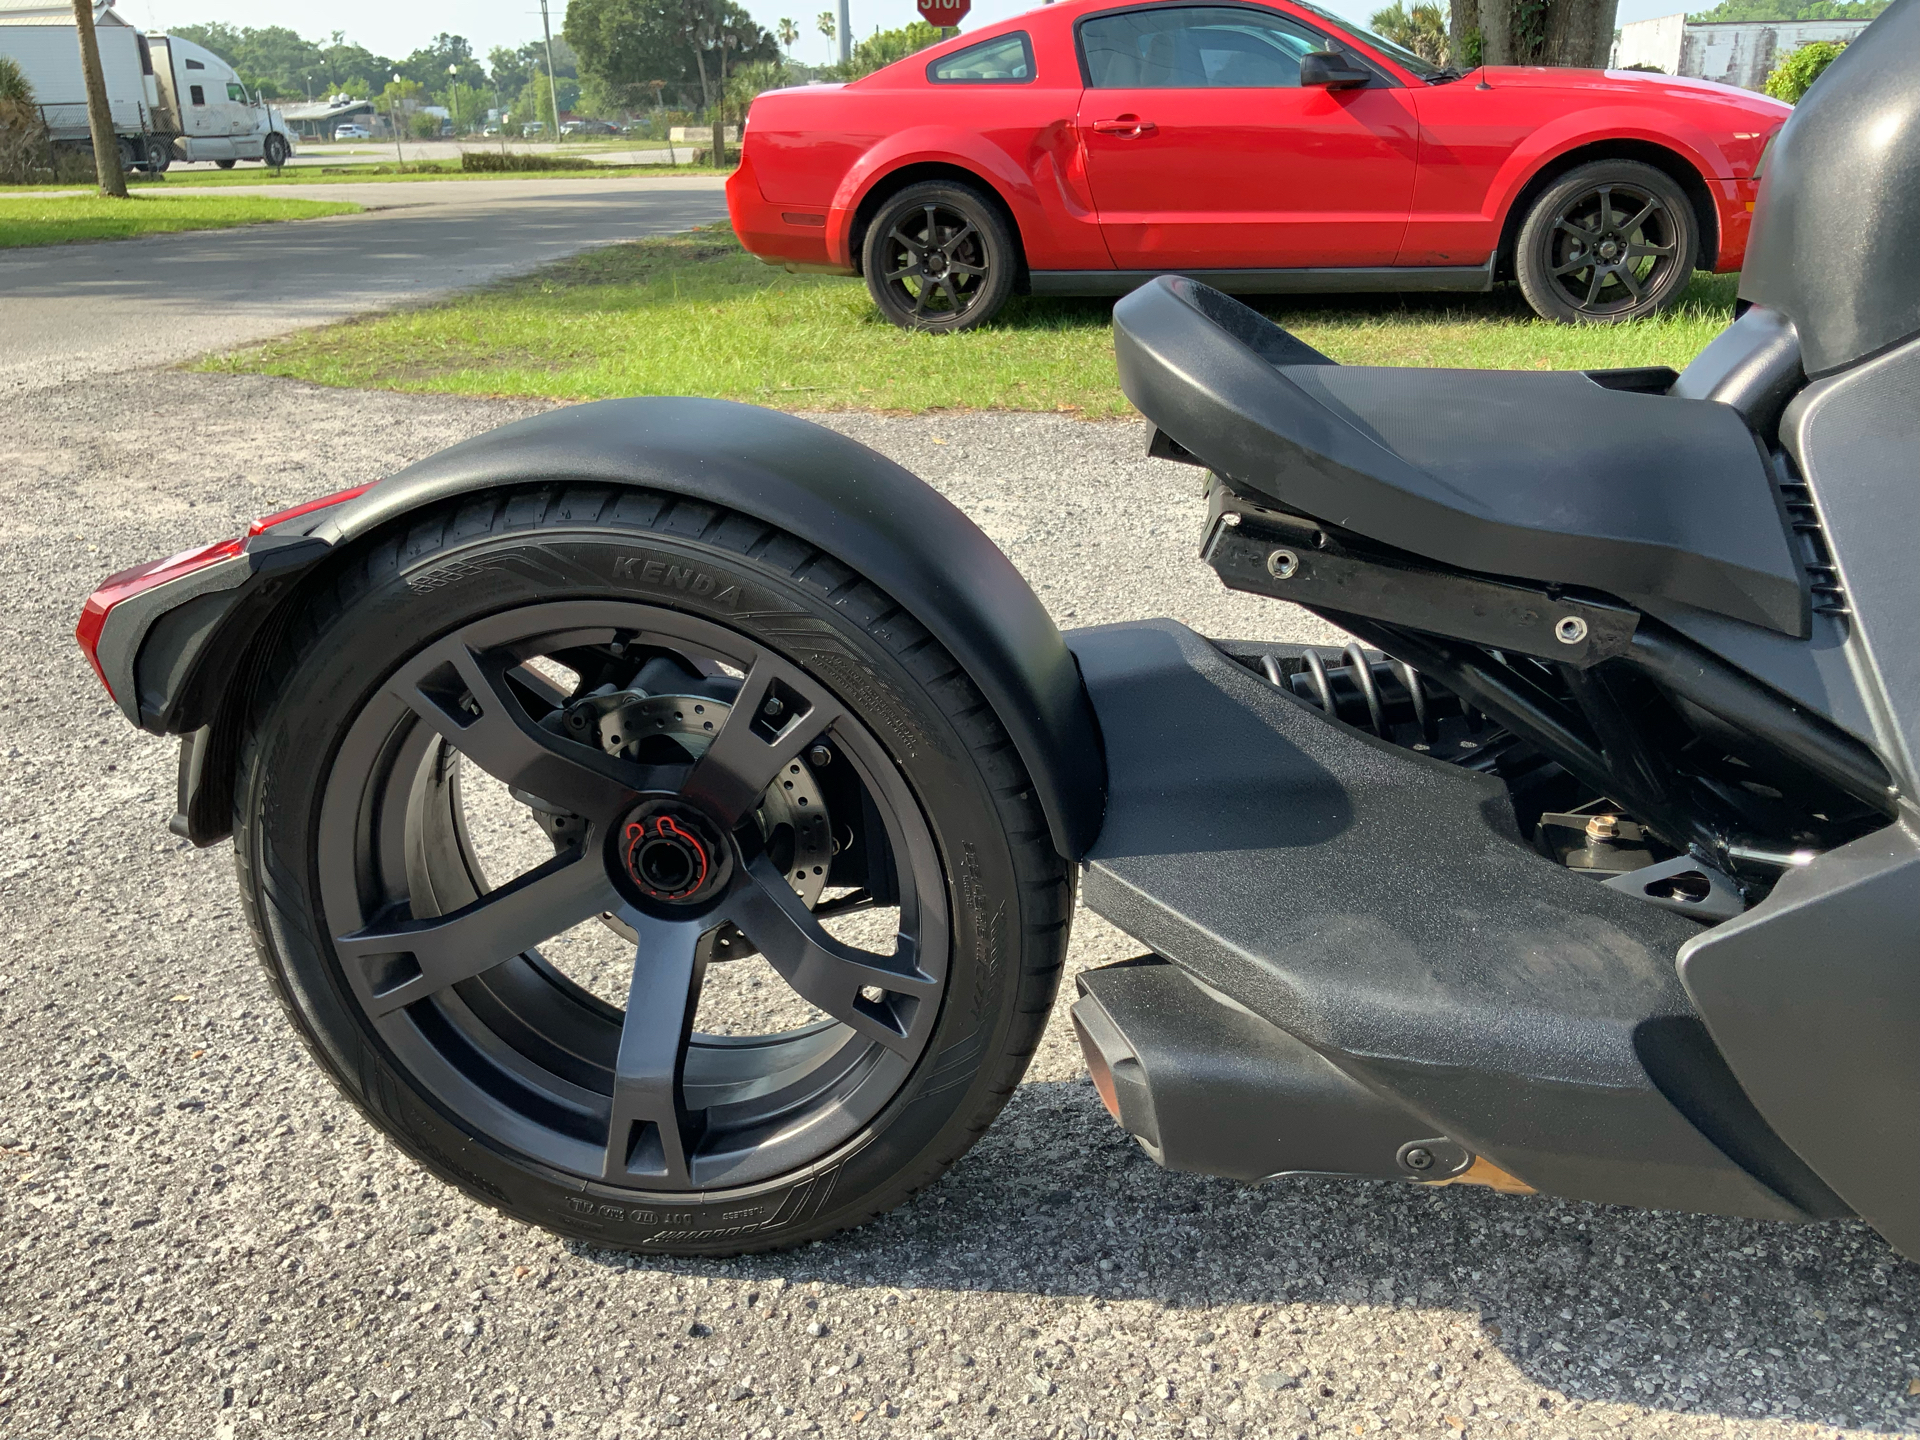 2020 Can-Am Ryker 600 ACE in Sanford, Florida - Photo 11